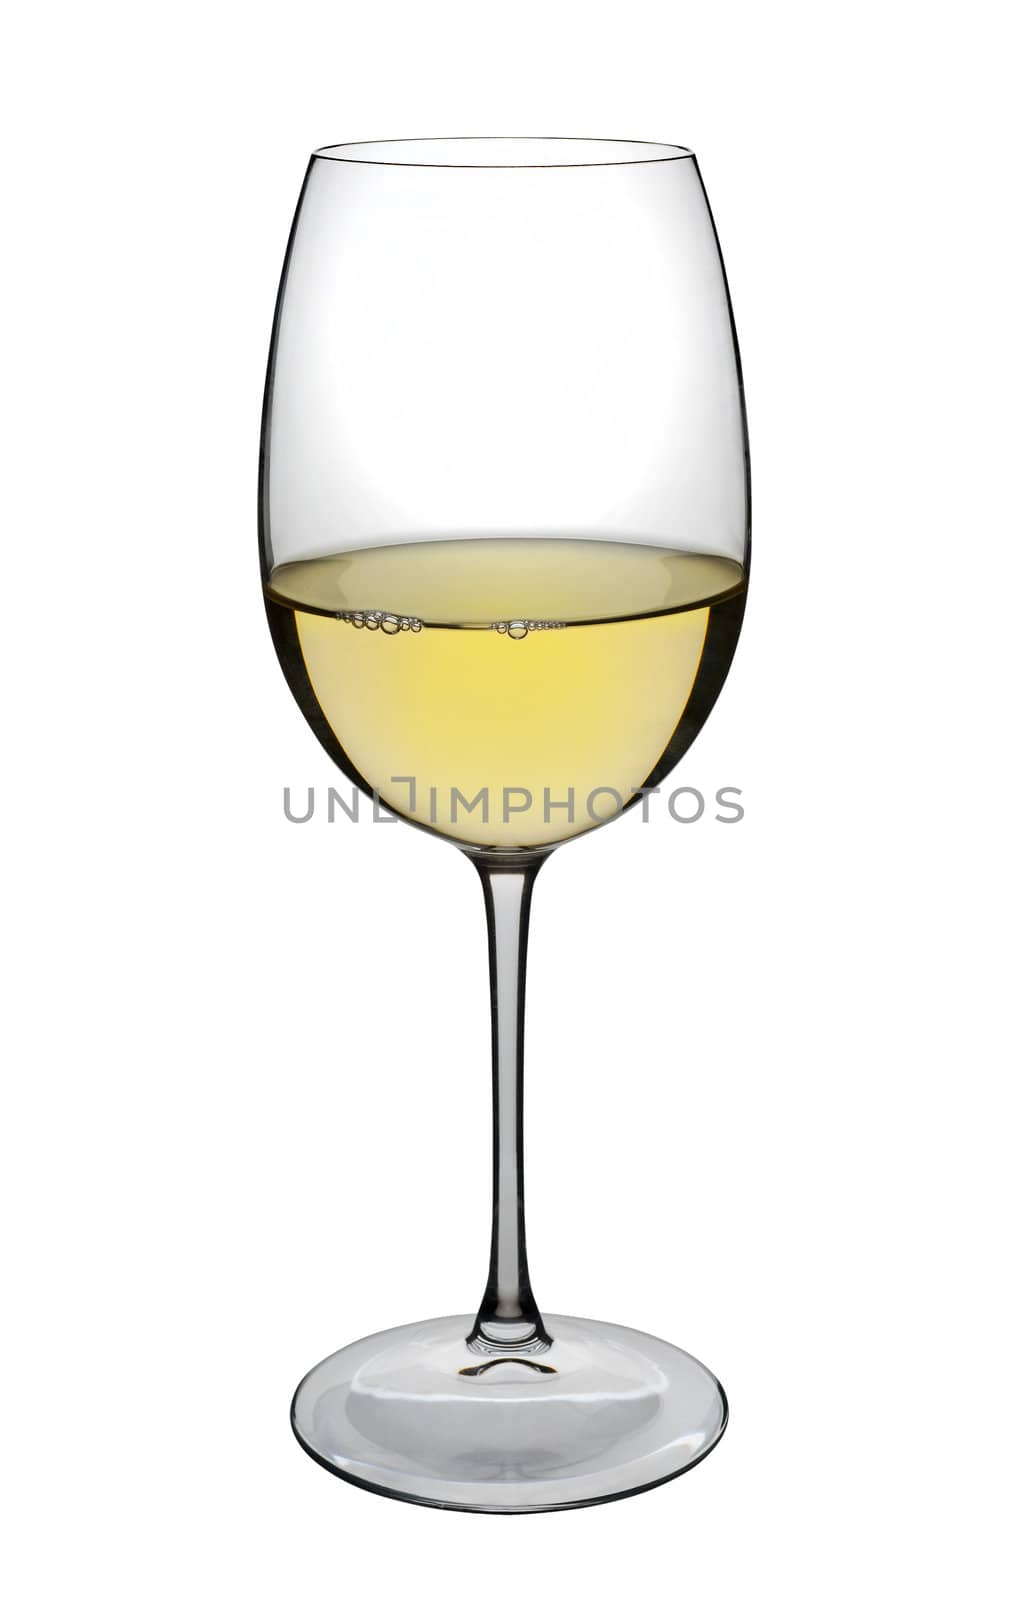 White wine glass with small bubbles, isolated